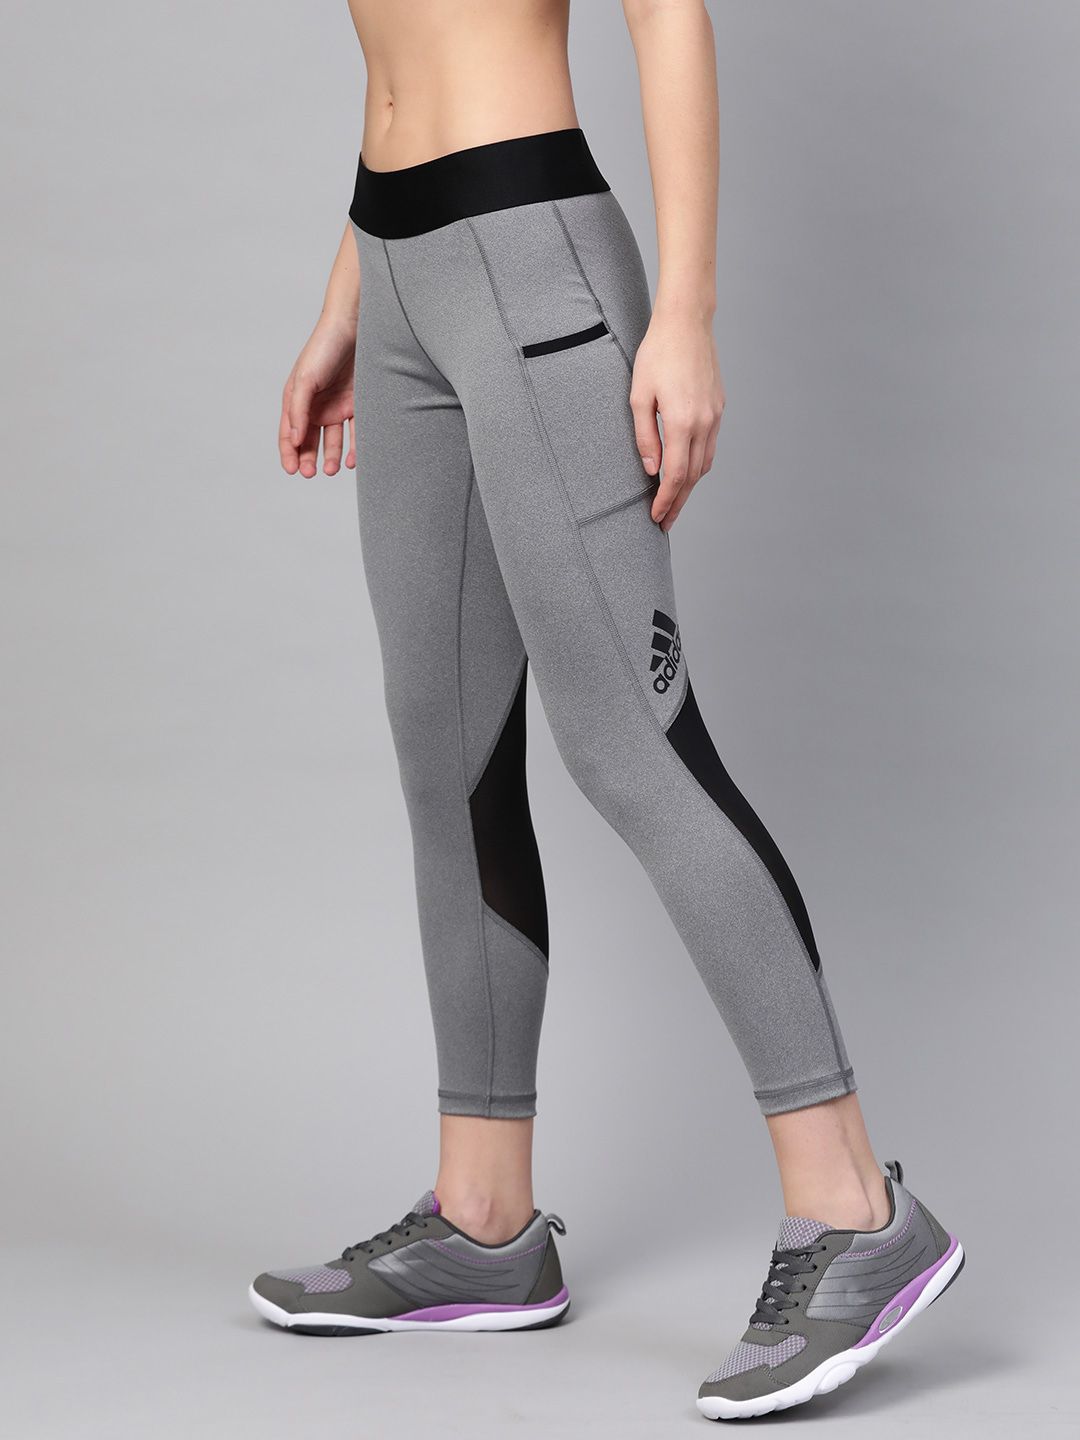 ADIDAS Women Grey Solid Alphaskin 7/8th Training Tights Price in India